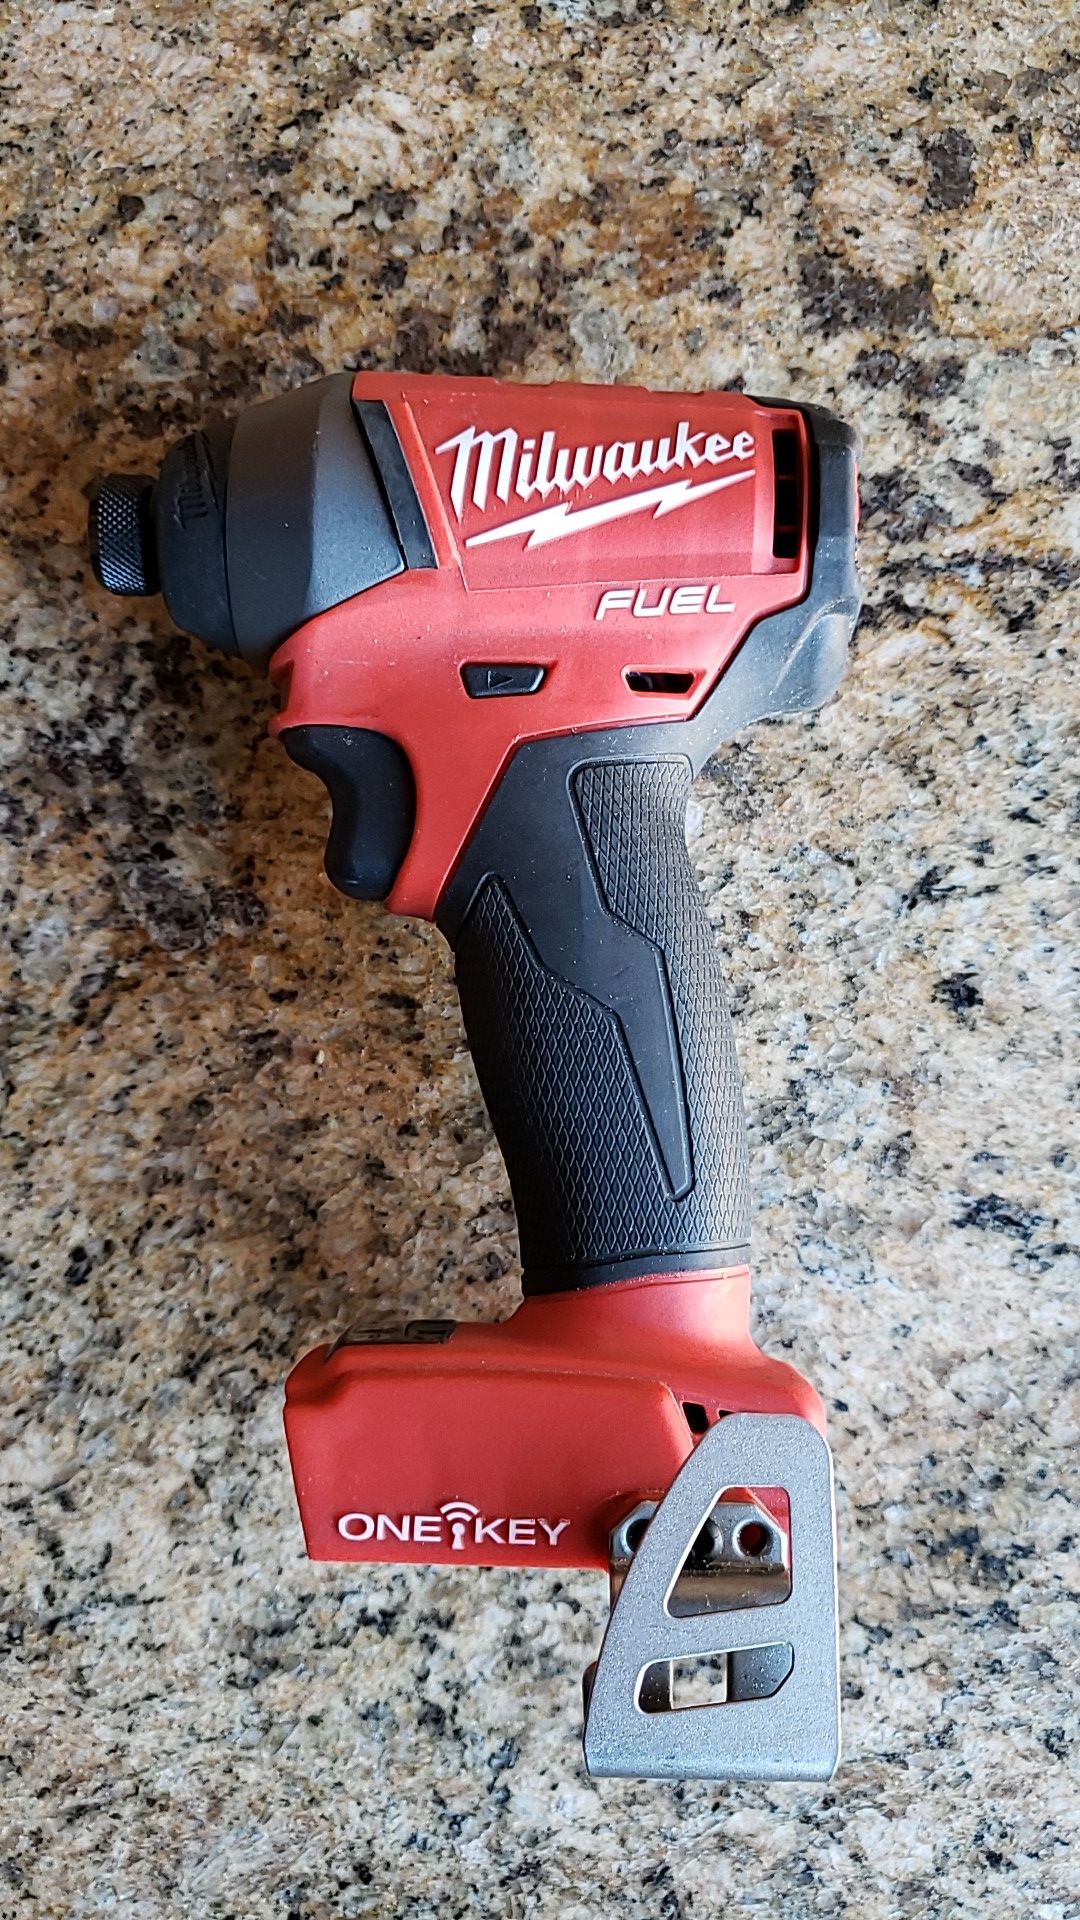 Milwaukee m18 fuel one key impact used in good condition $70 FIRM NO OFFERS